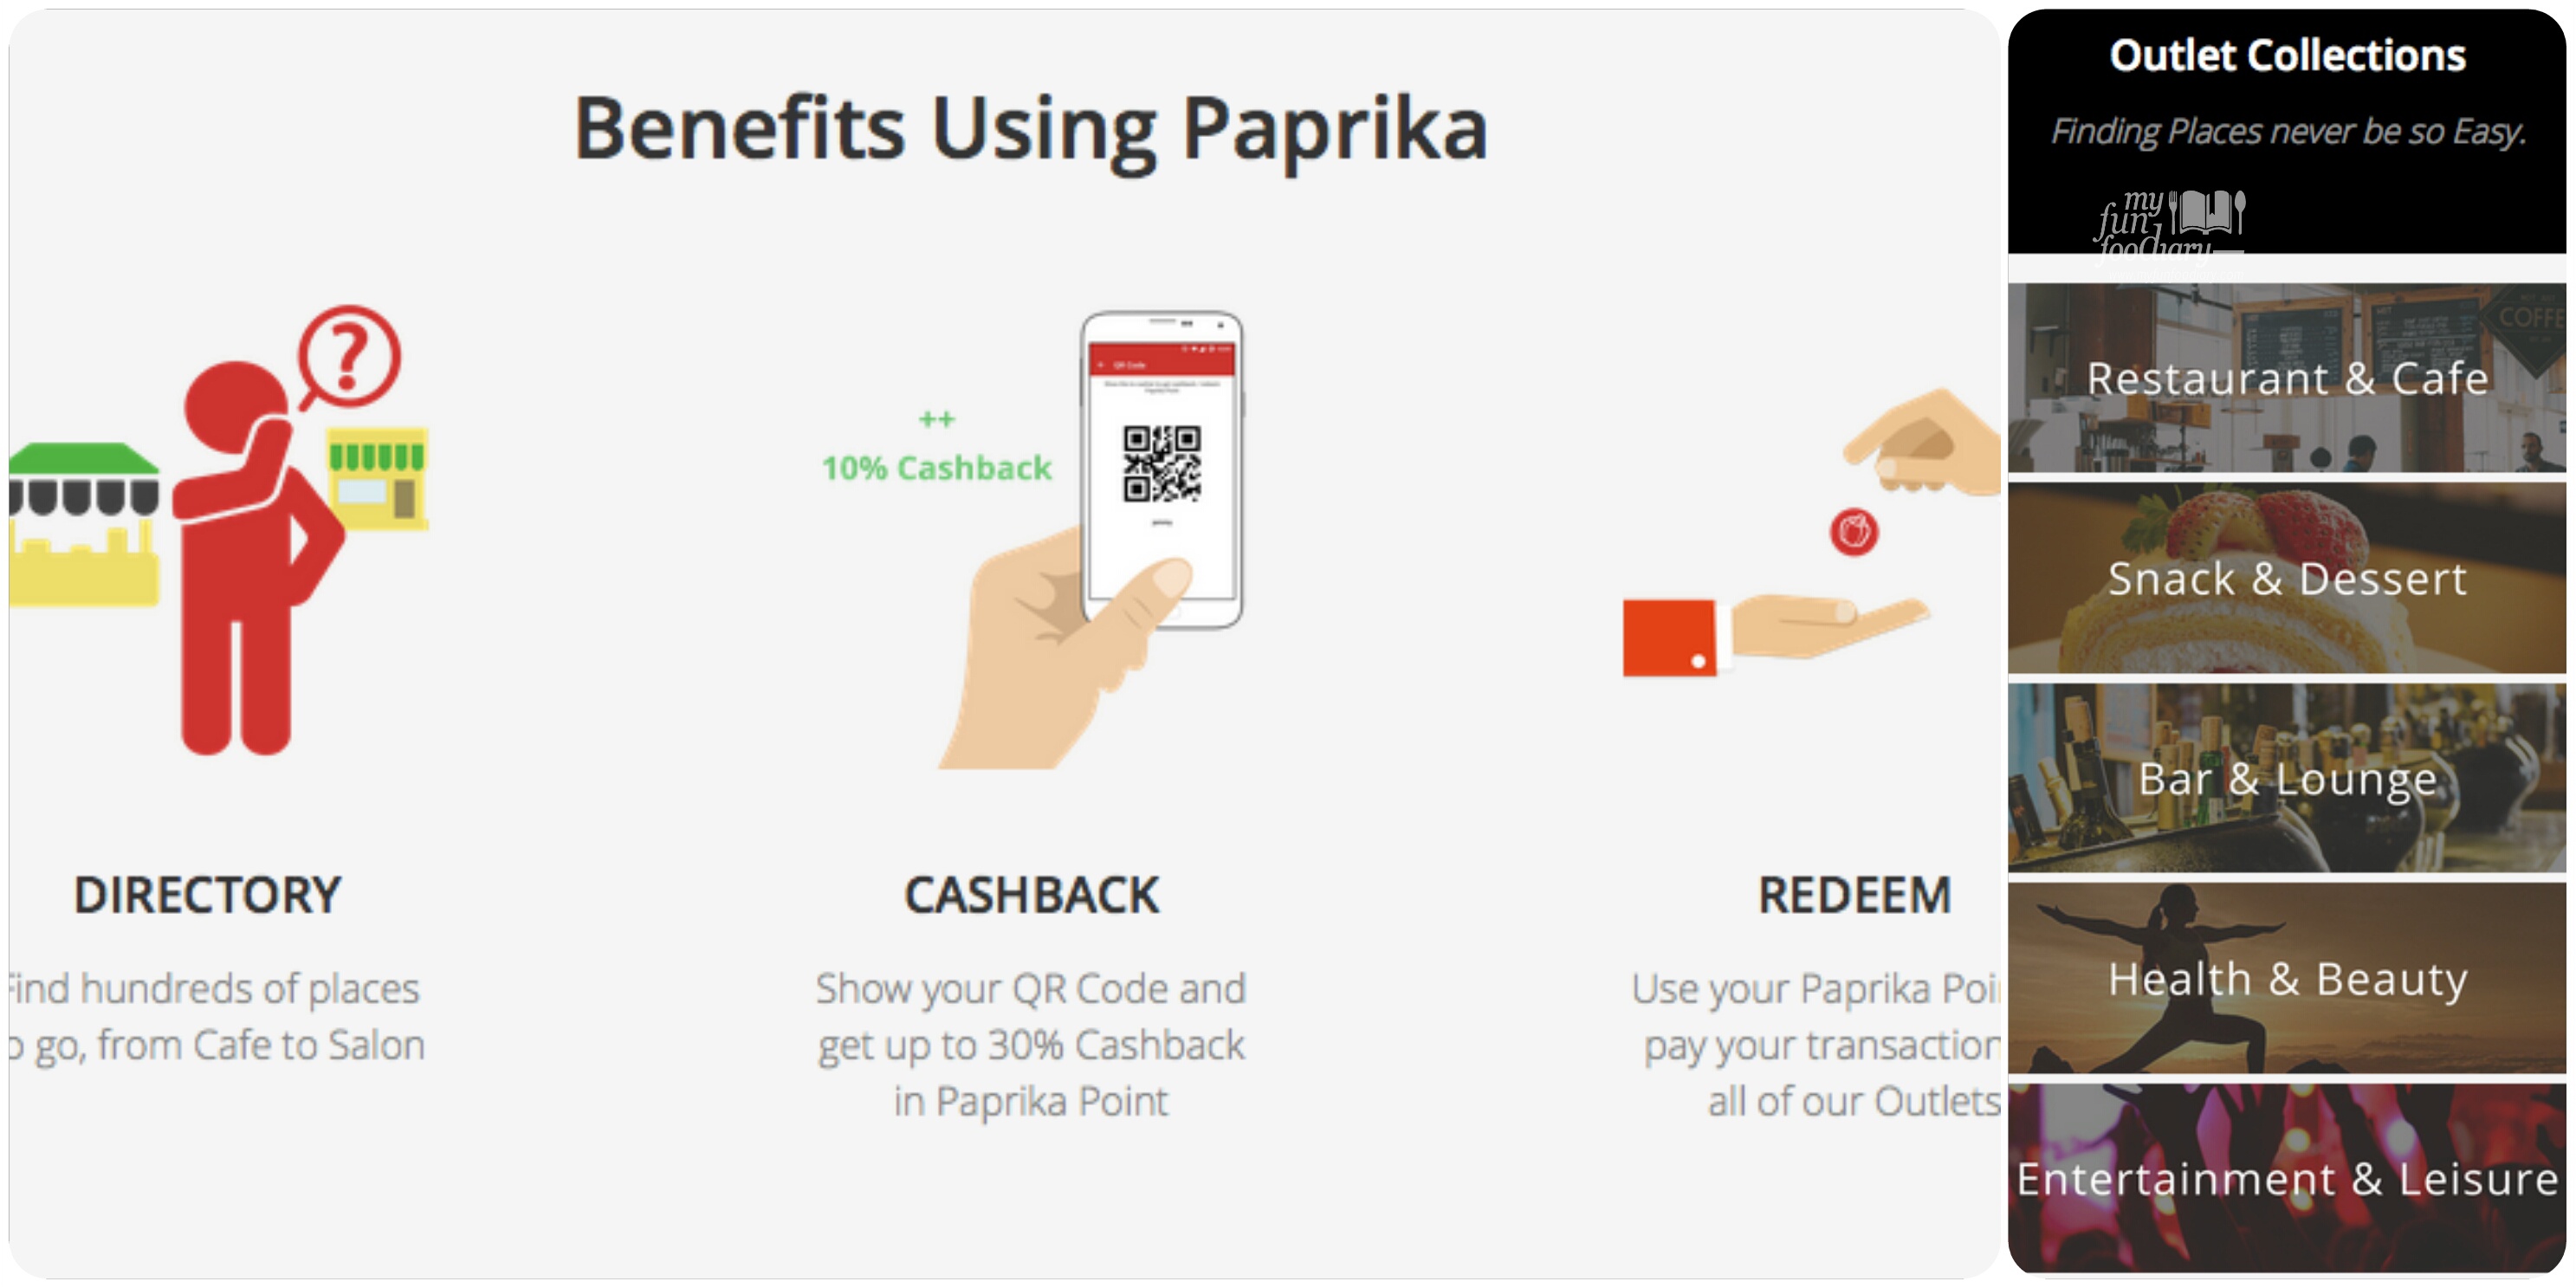 Benefits Using Paprika and Outlet Collections by Myfunfoodiary